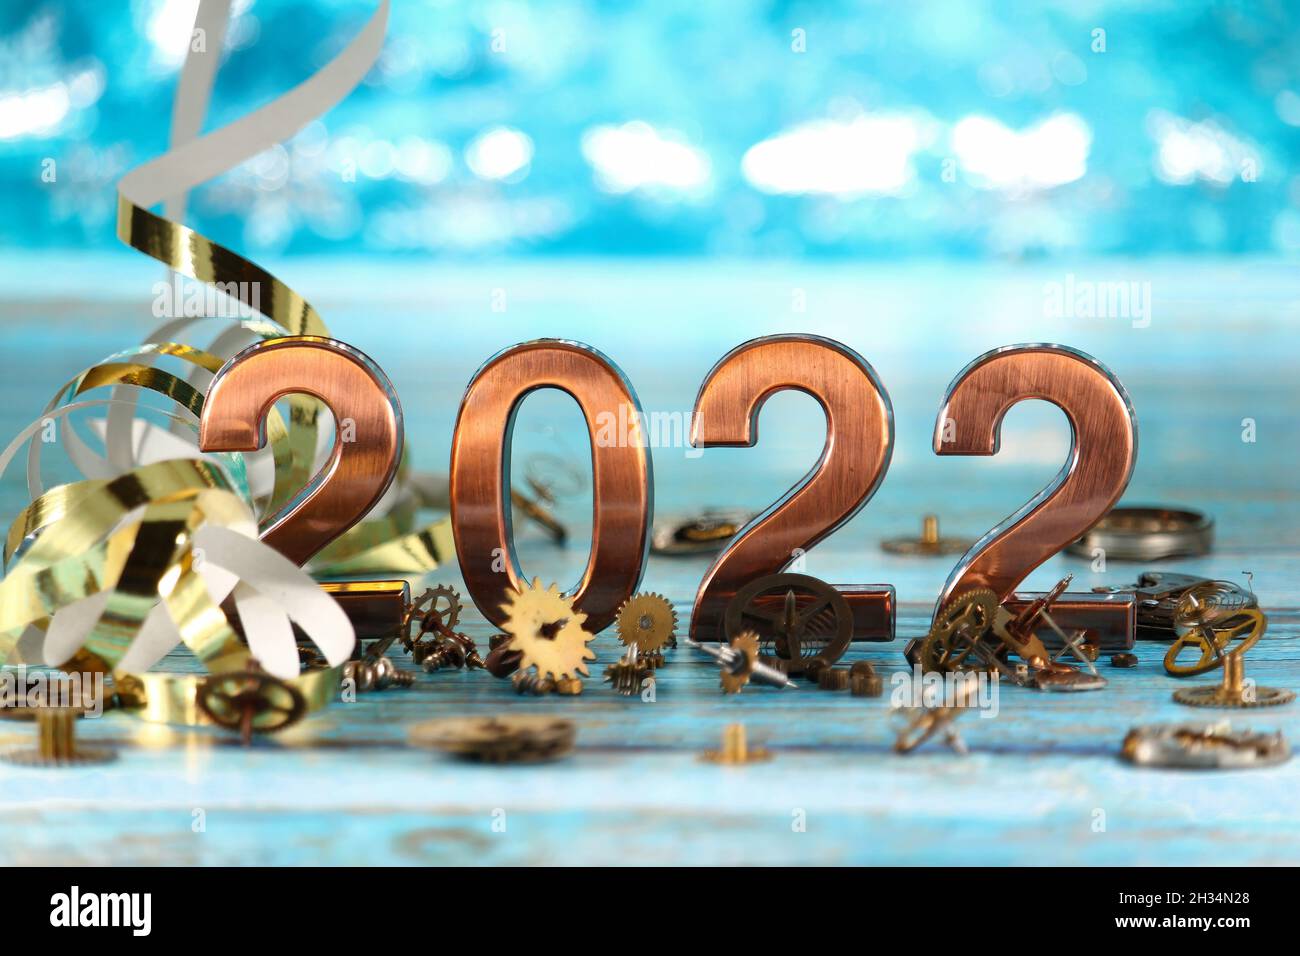 Happy New Year. The number 2022 on blue background Stock Photo - Alamy